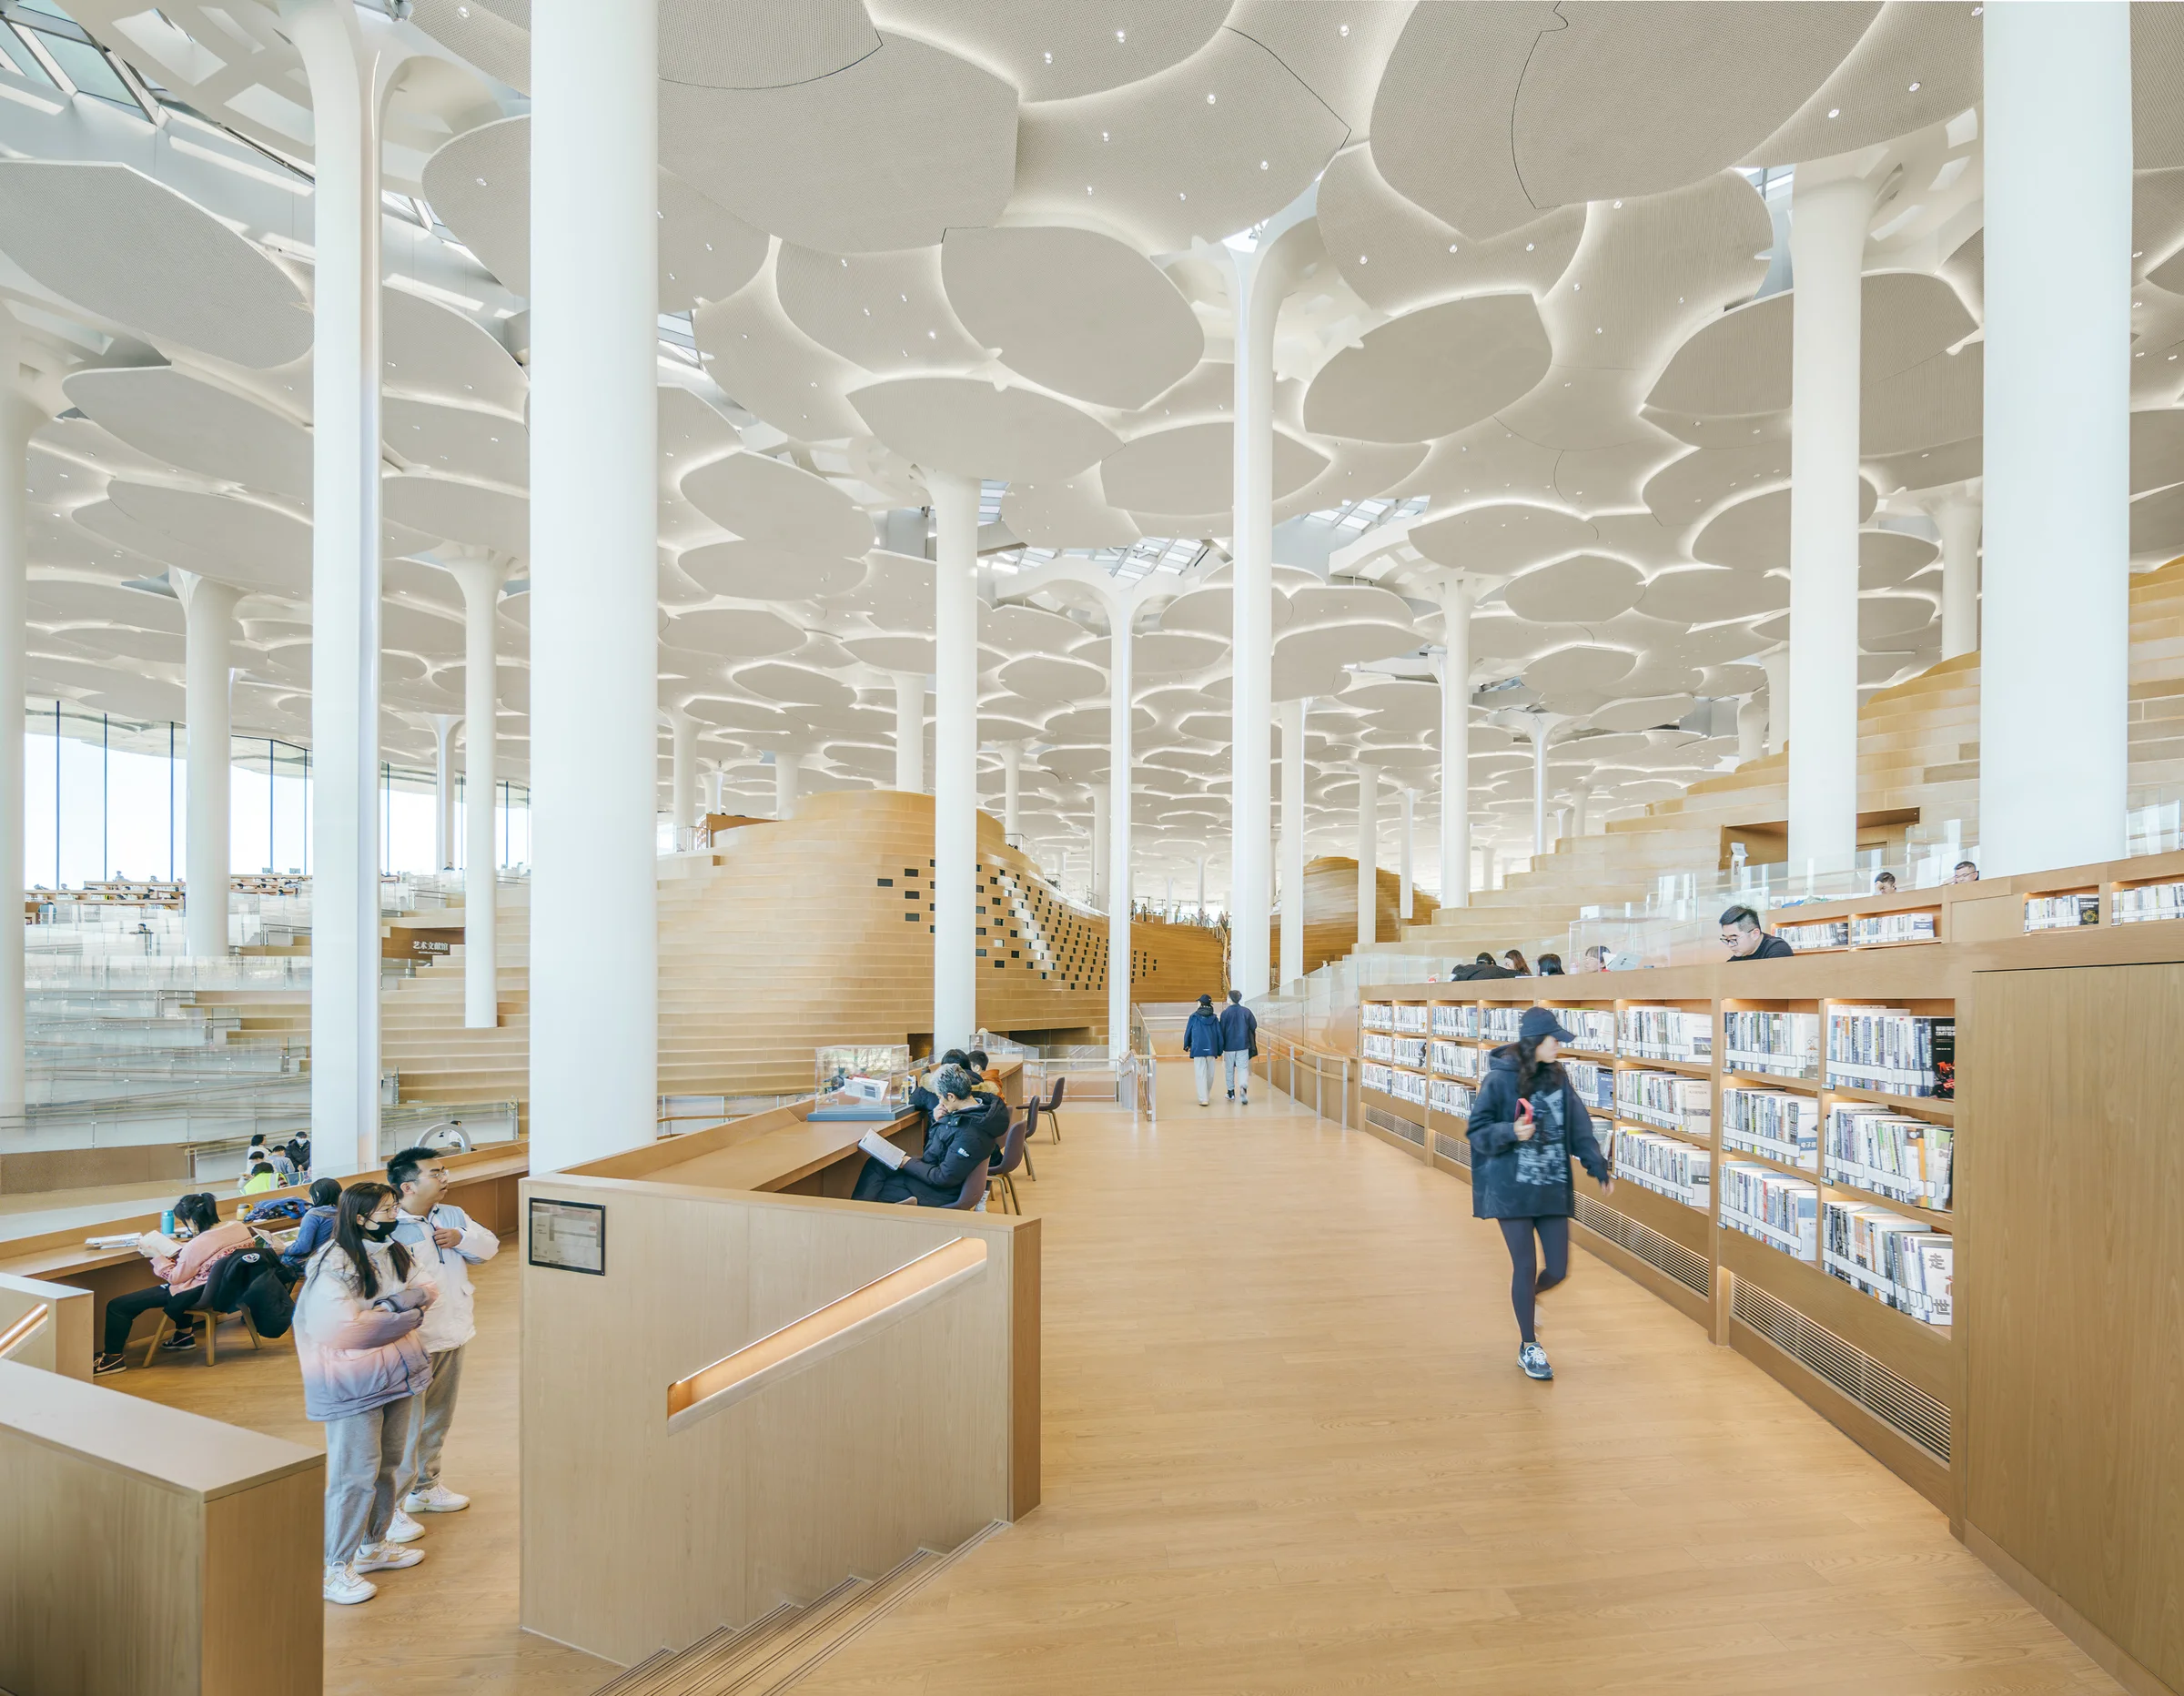 Interior of Beijing City Library, with tall columns and round roofs mimicking trees.